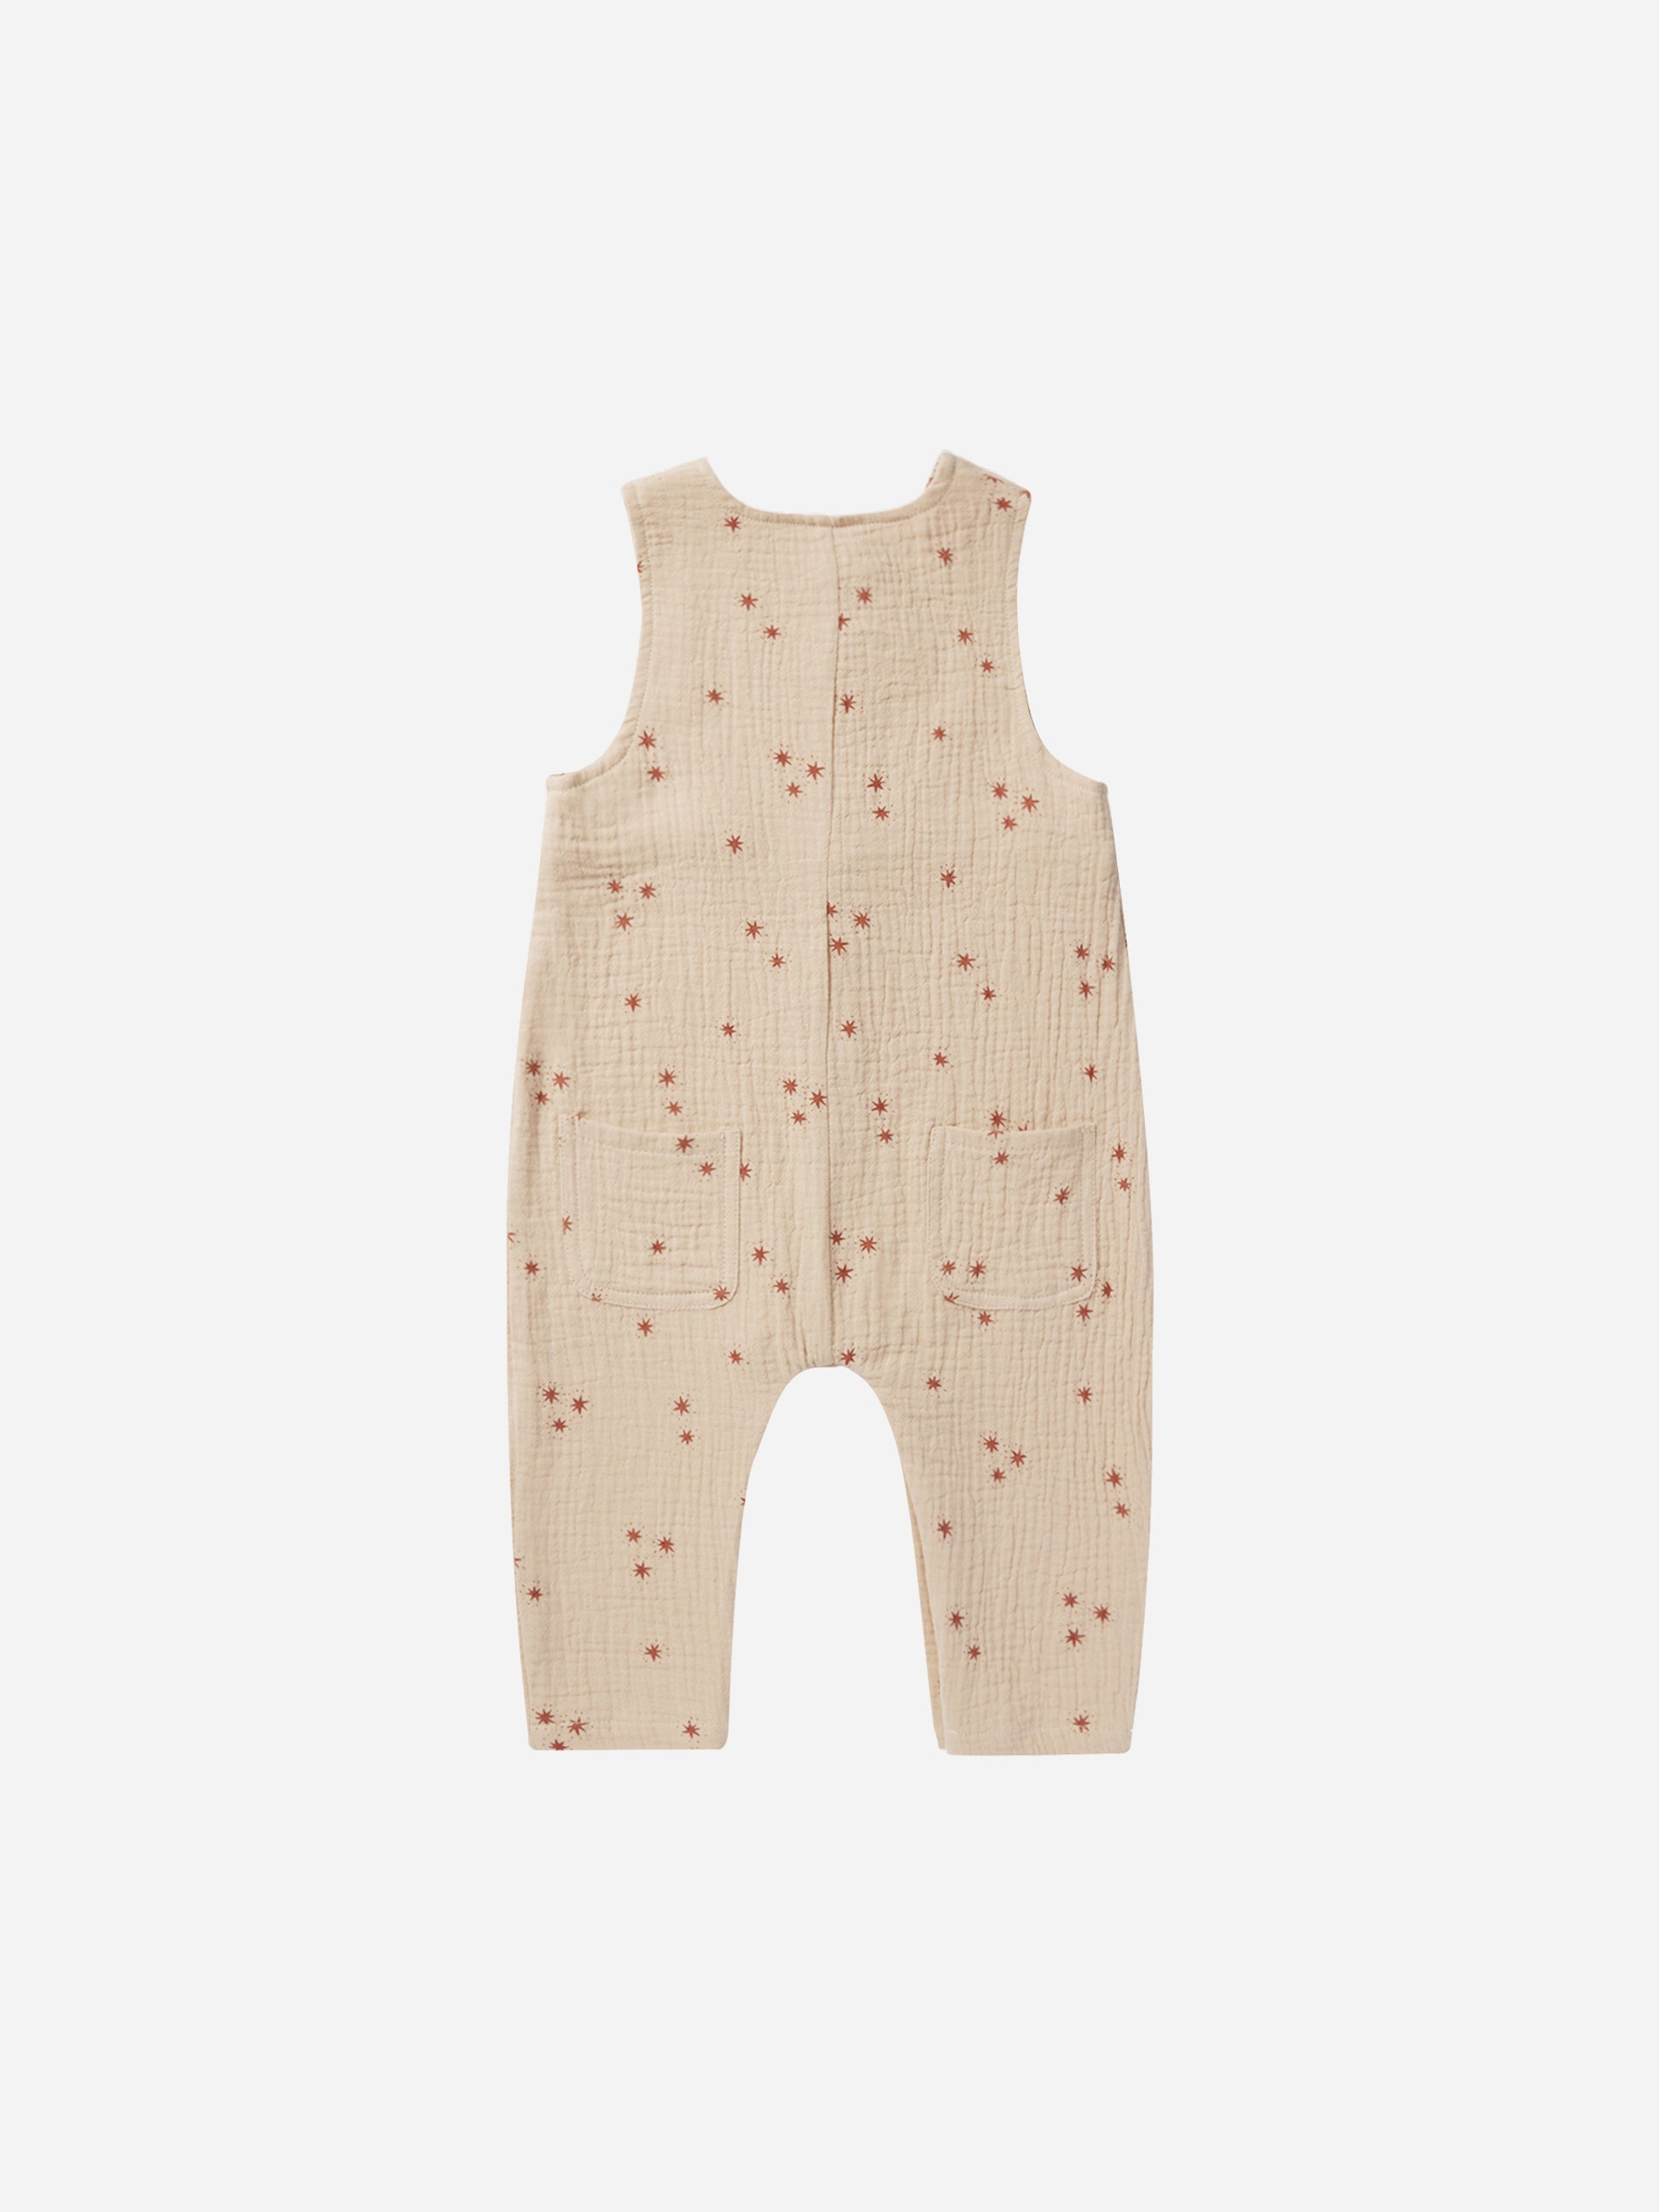 Button Jumpsuit || Starburst - Rylee + Cru | Kids Clothes | Trendy Baby Clothes | Modern Infant Outfits |